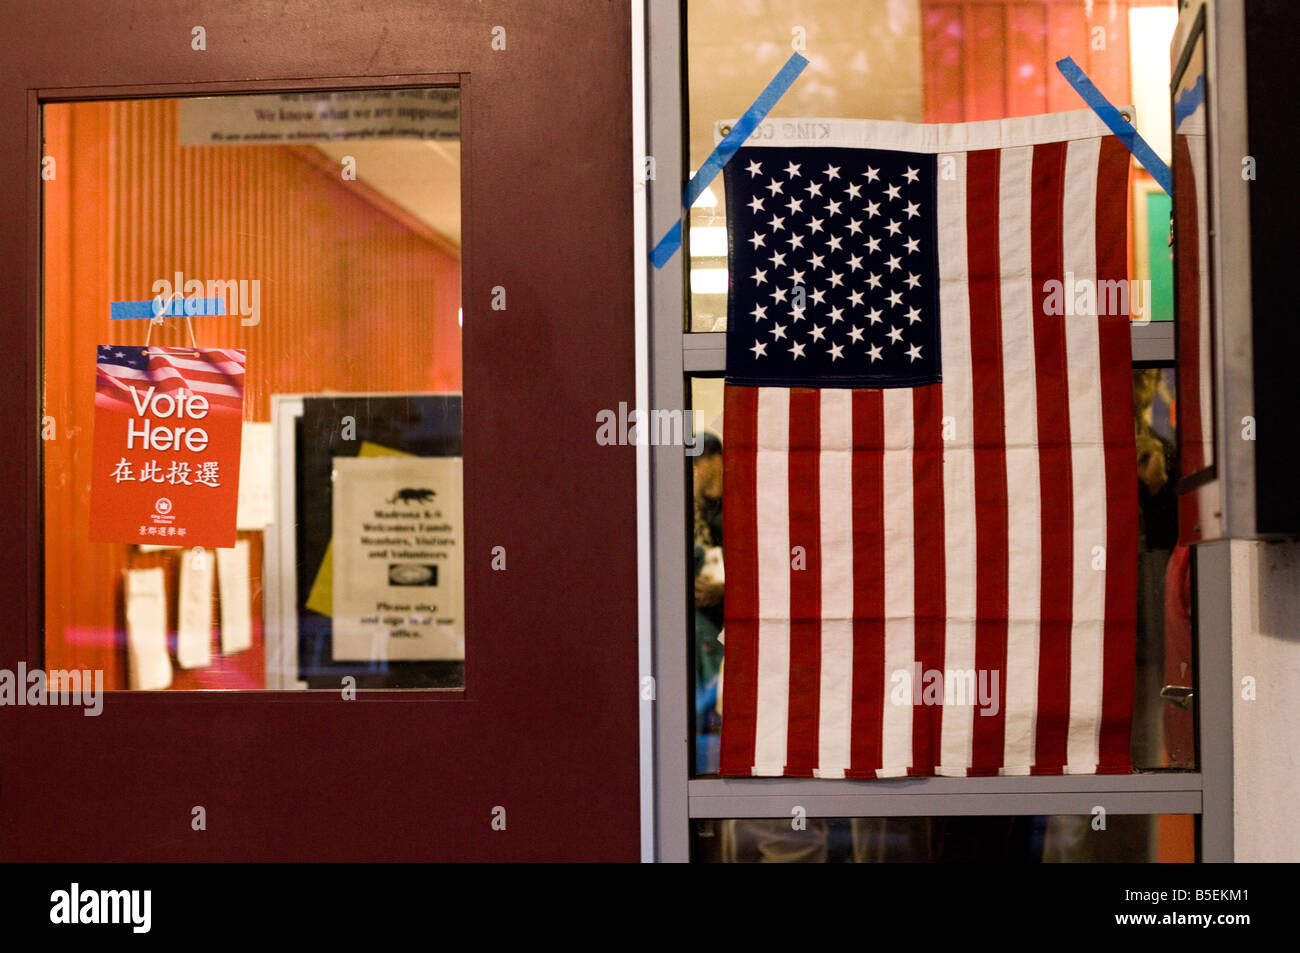 November 4th, 2008. USA, WA, Seattle. Entrance to the polling place on a day of presidential General Election in America. Stock Photo